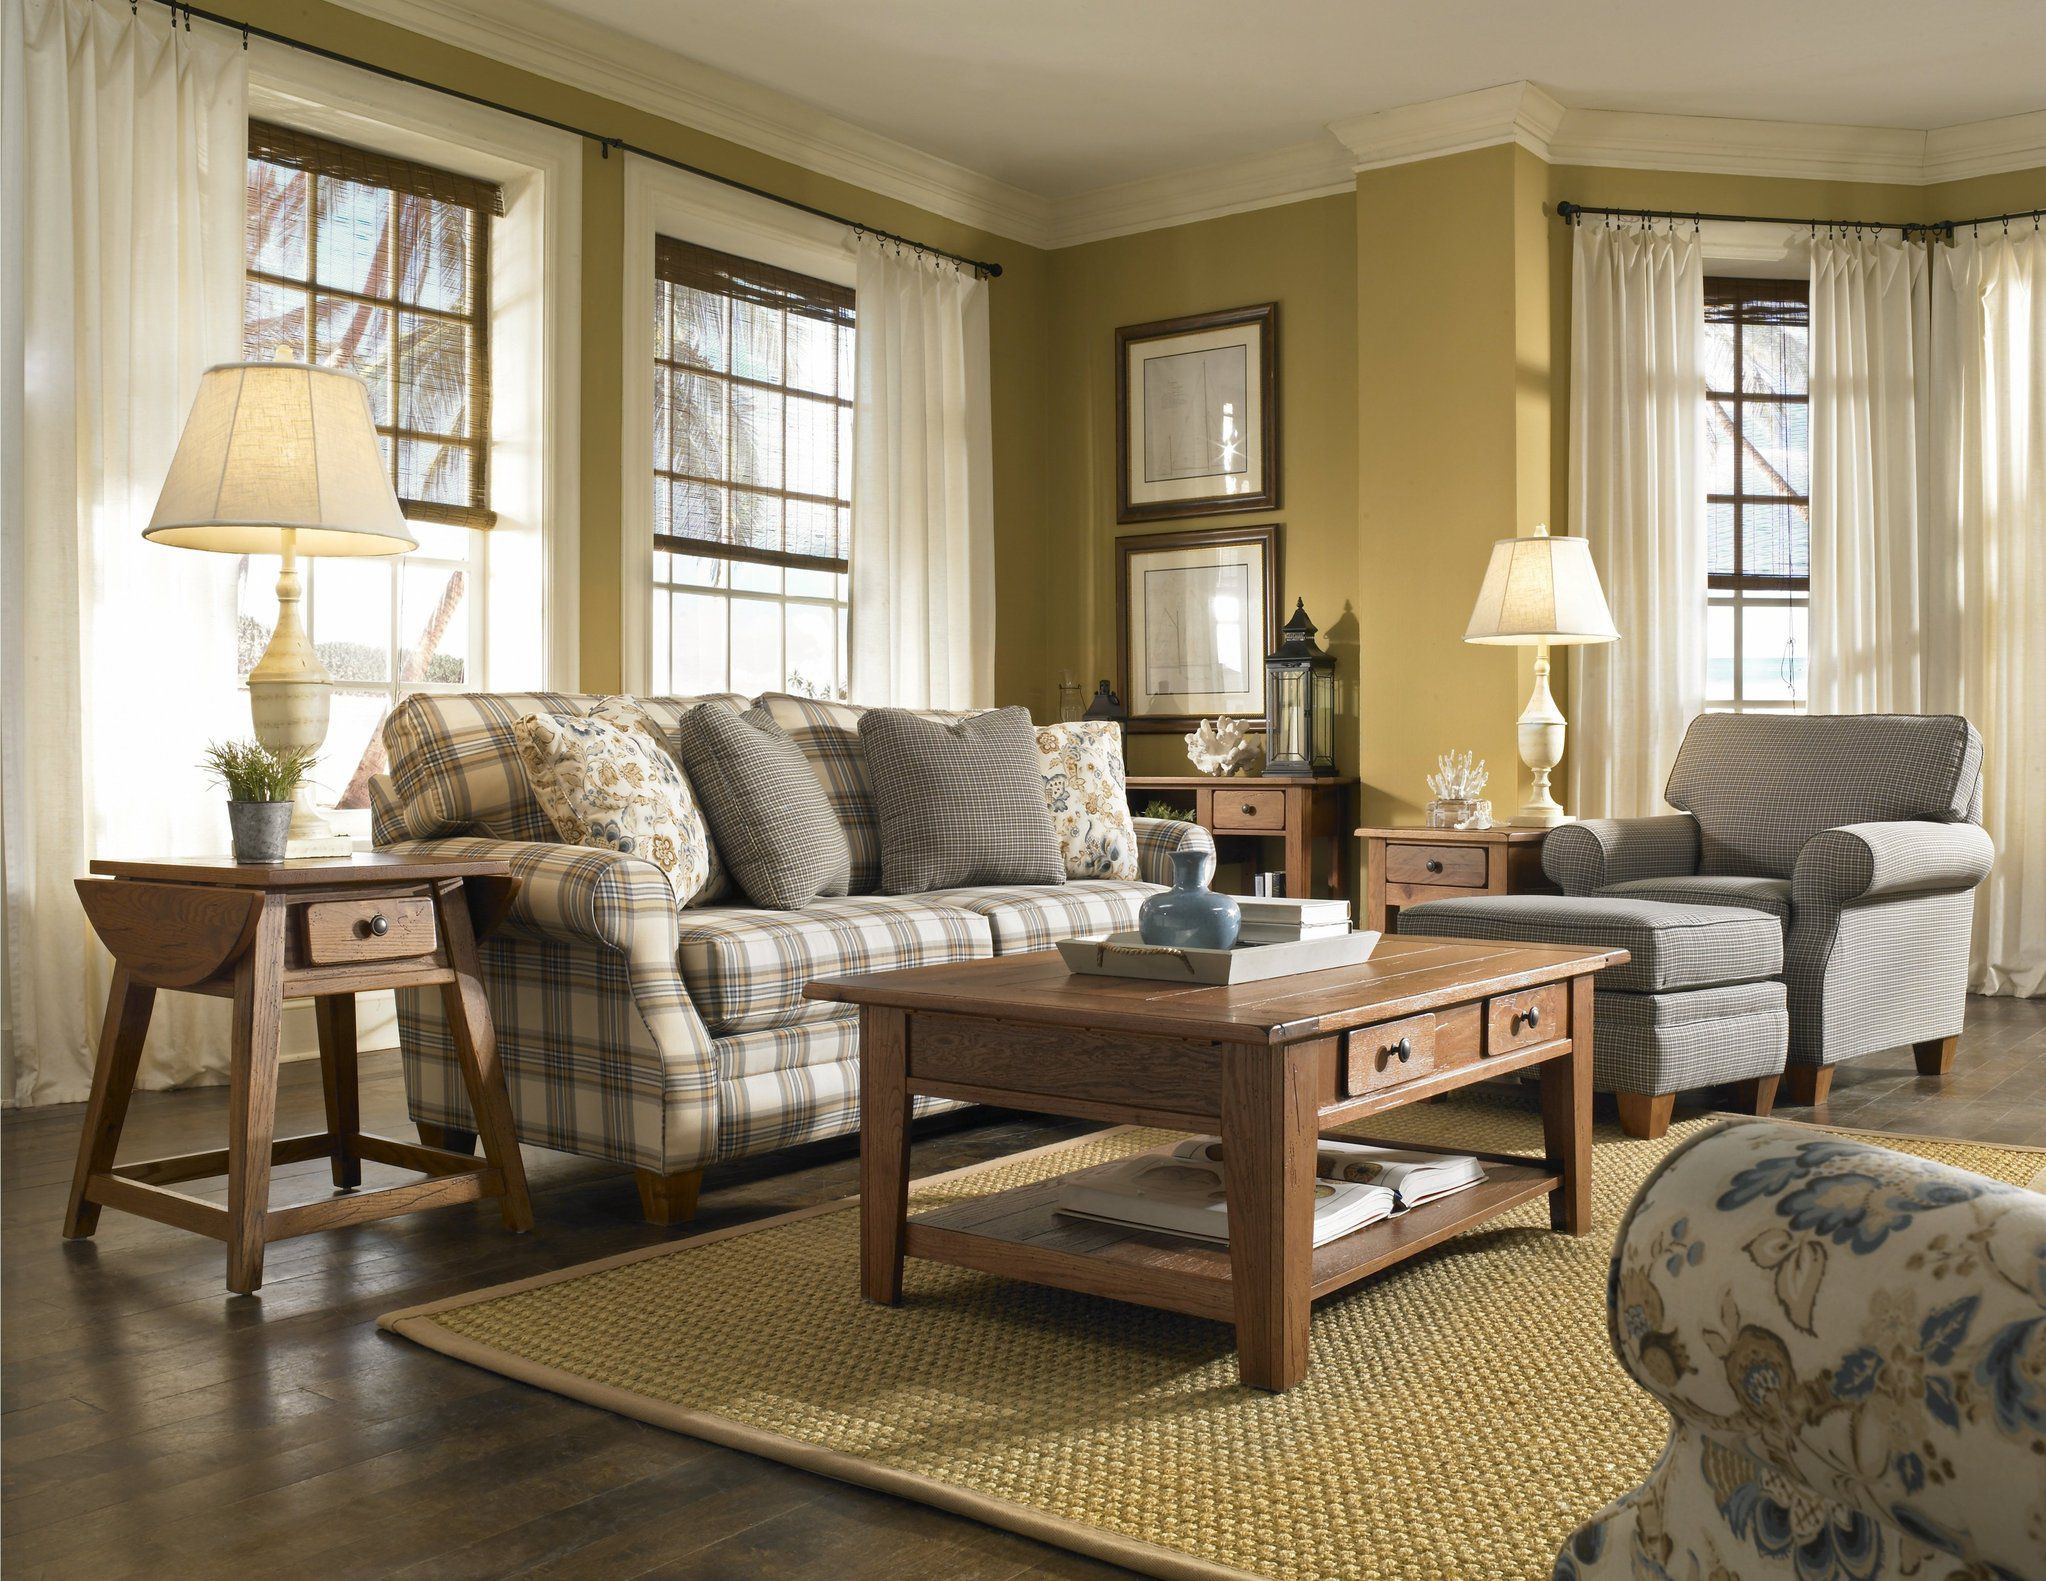 Country Living Room Chairs
 Your Guide to Country Living Room Design Details Traba Homes